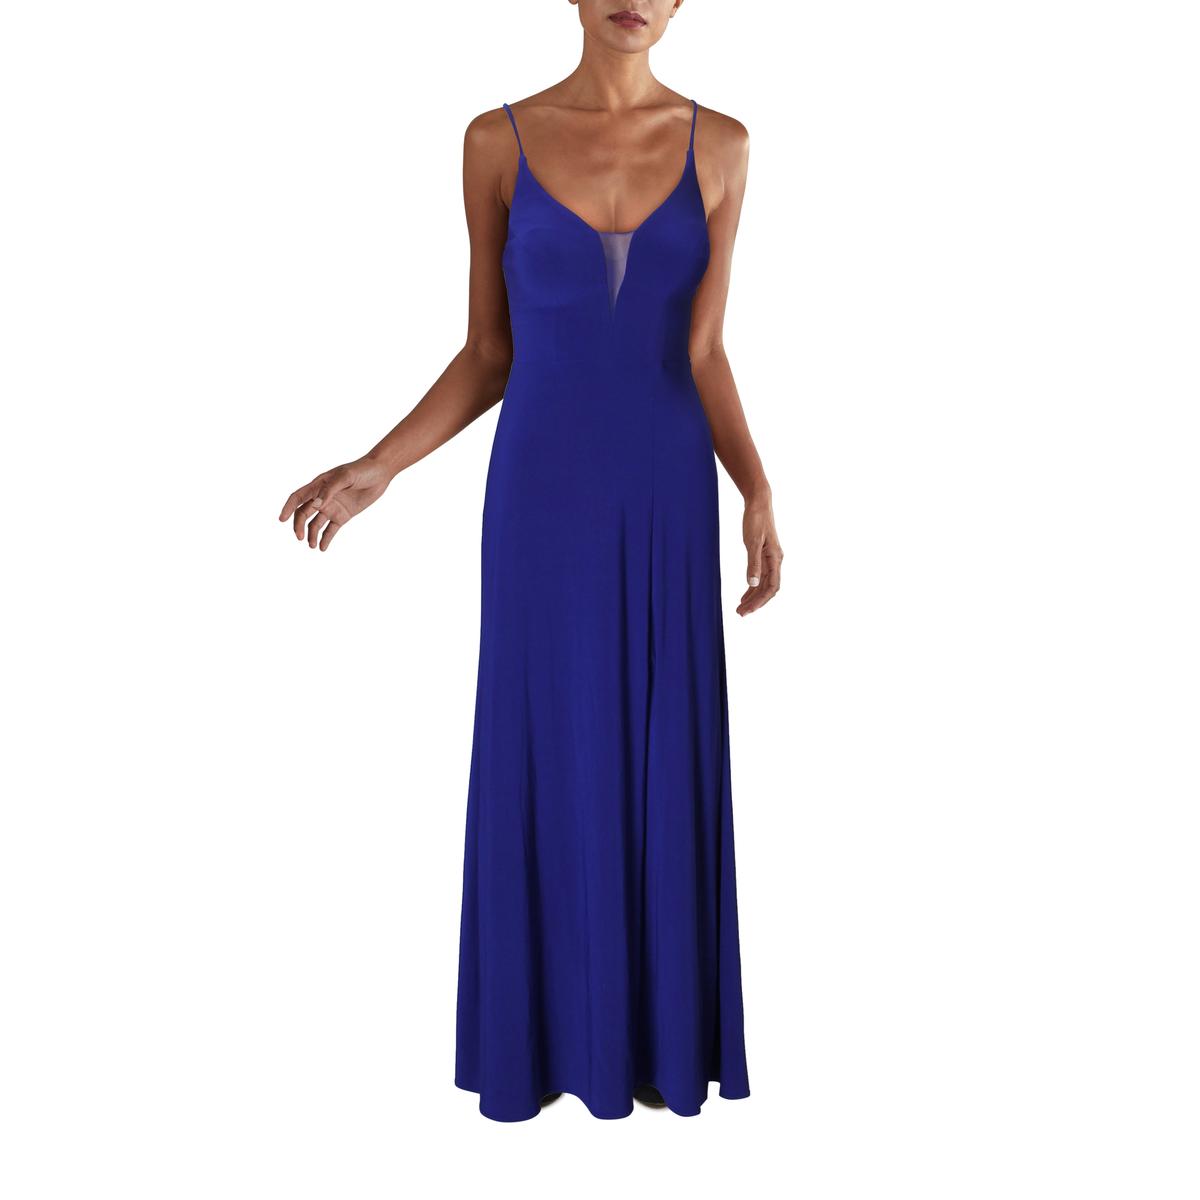 Morgan & Co. Womens Blue Lace-Up Illusion Slit Formal Dress Gown 3 BHFO ...